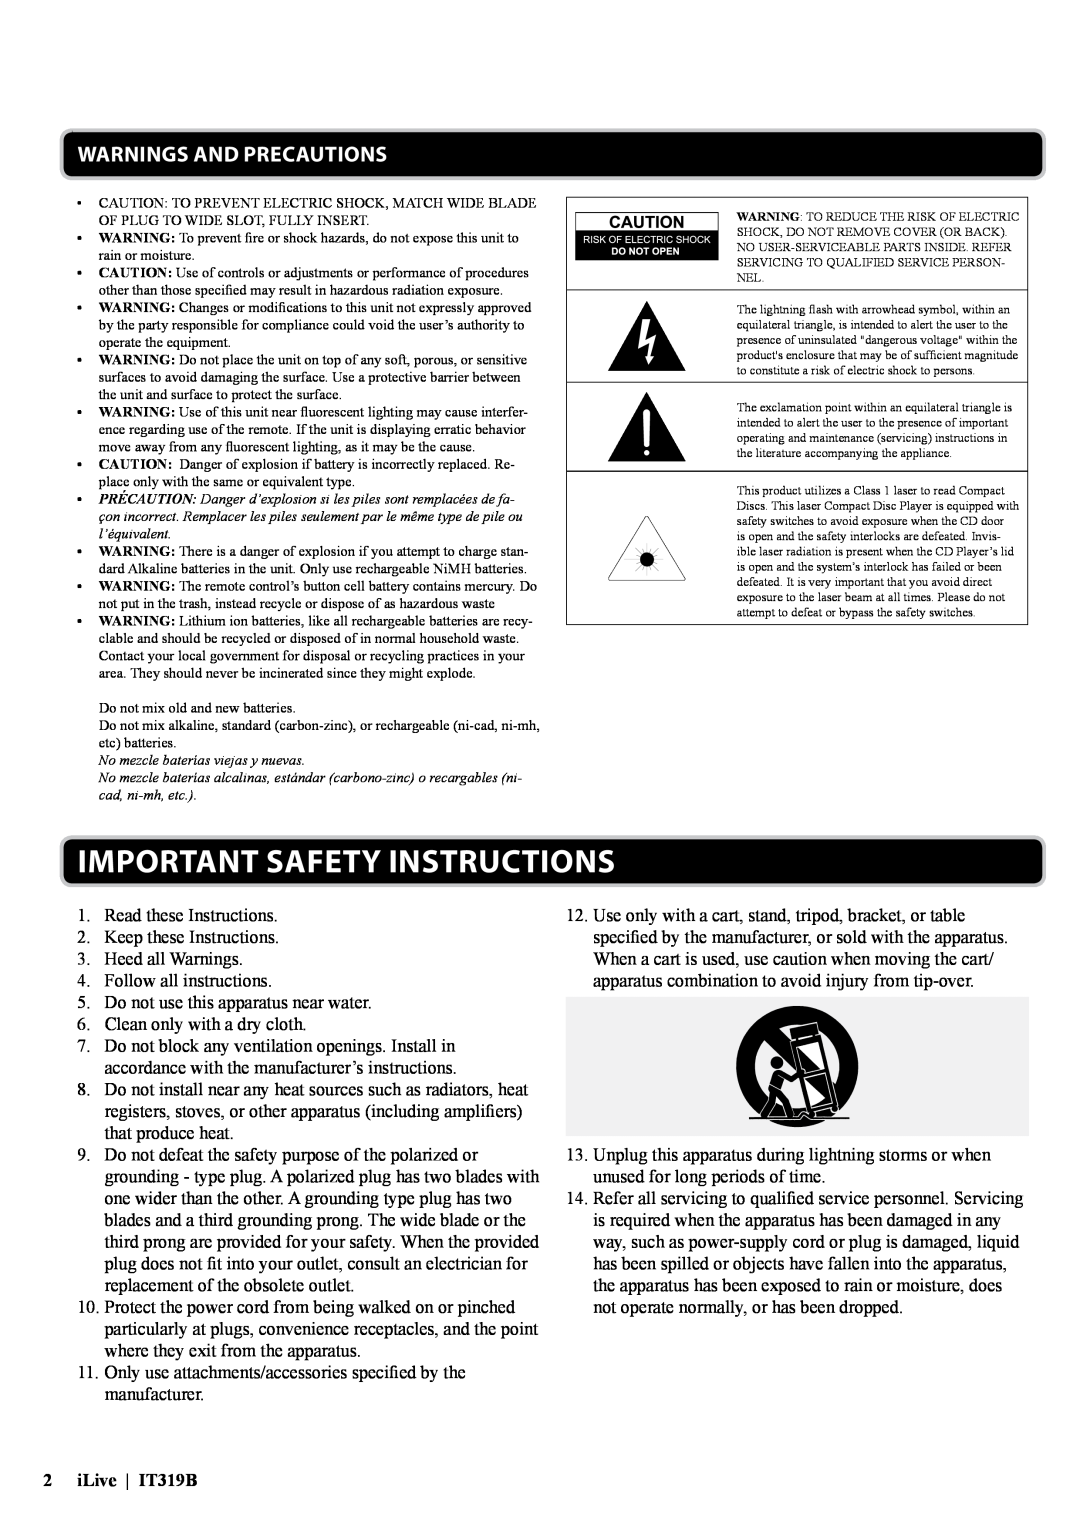 iLive manual Warnings and Precautions, Important Safety Instructions, iLive IT319B 